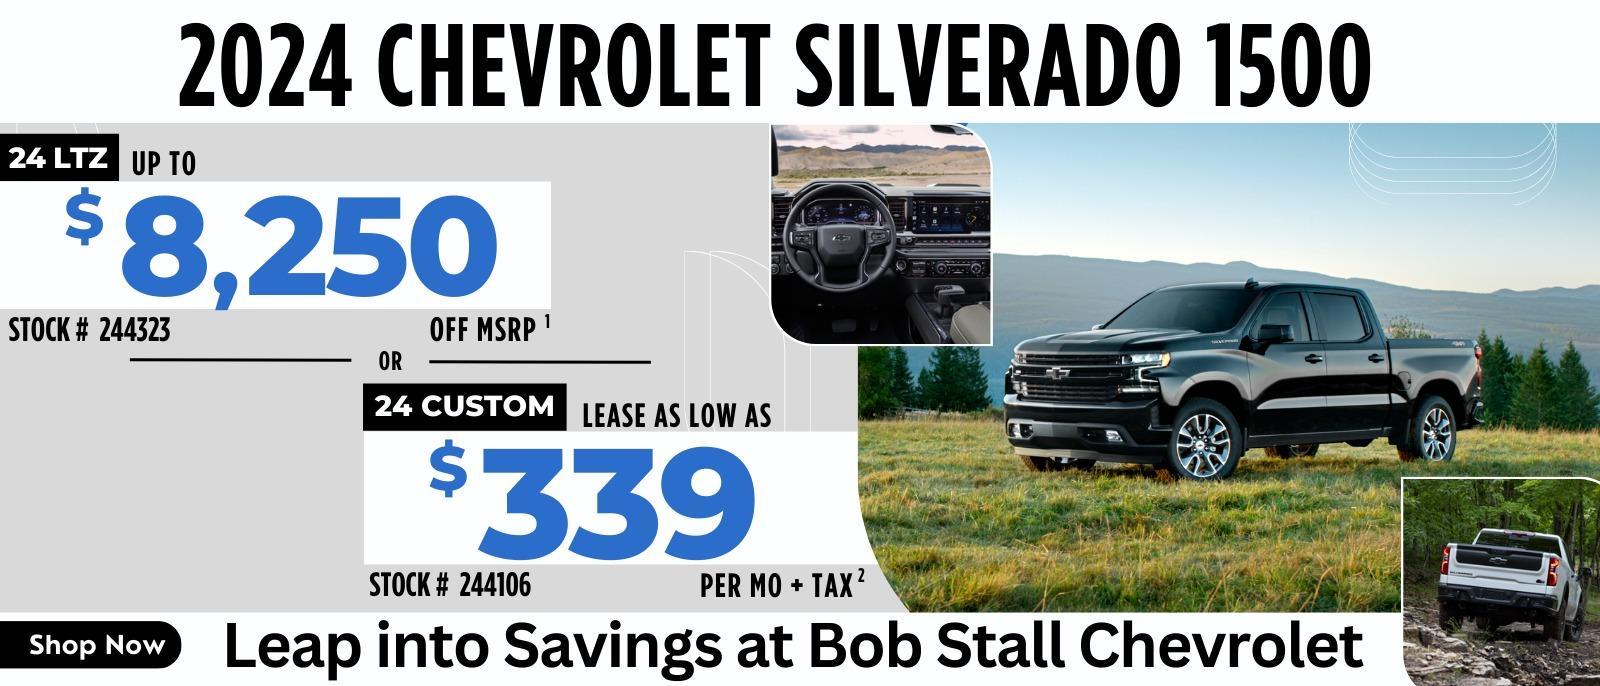 Silverado 2024  Savings - Up to $8,250 off MSRP or Lease as low as $339 per month for 36 Months